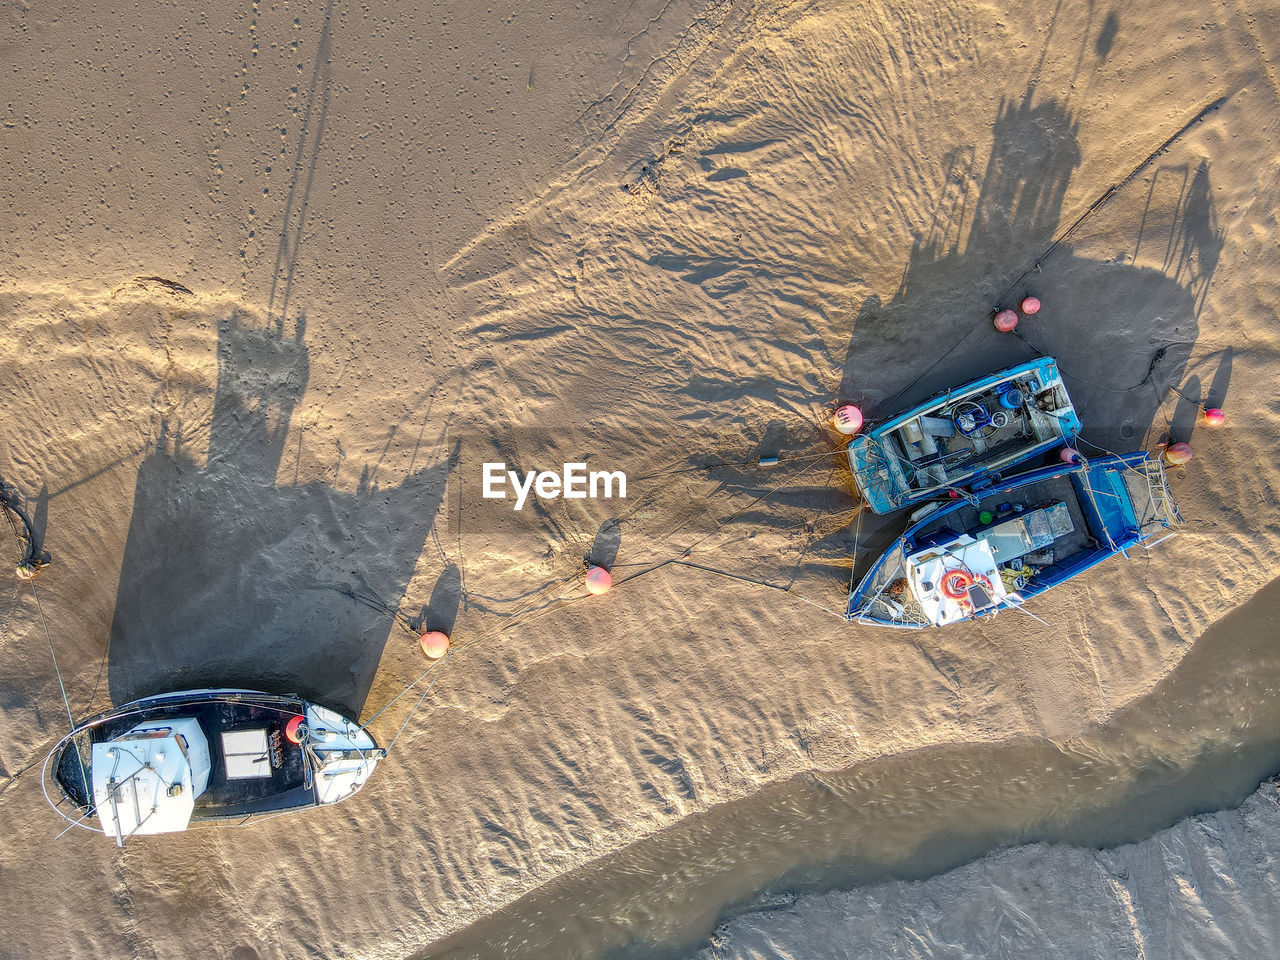 Overhead drone image of boats moored in muddy harbour